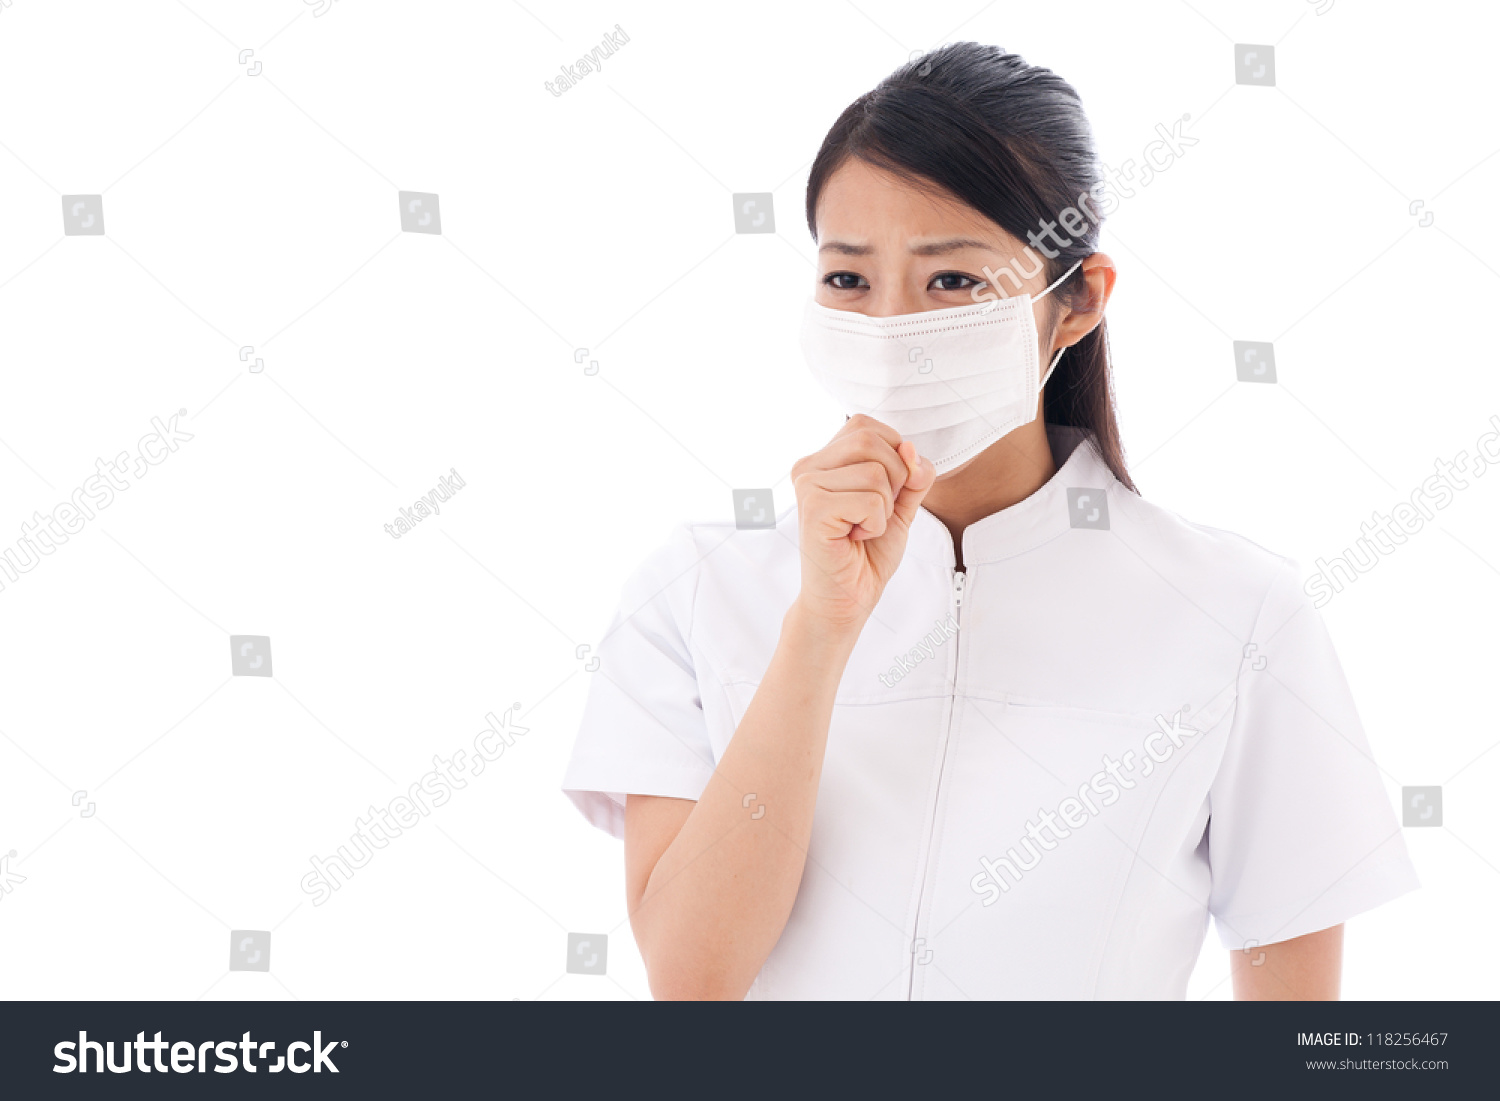 attractive asian nurse taking mask on white background #118256467